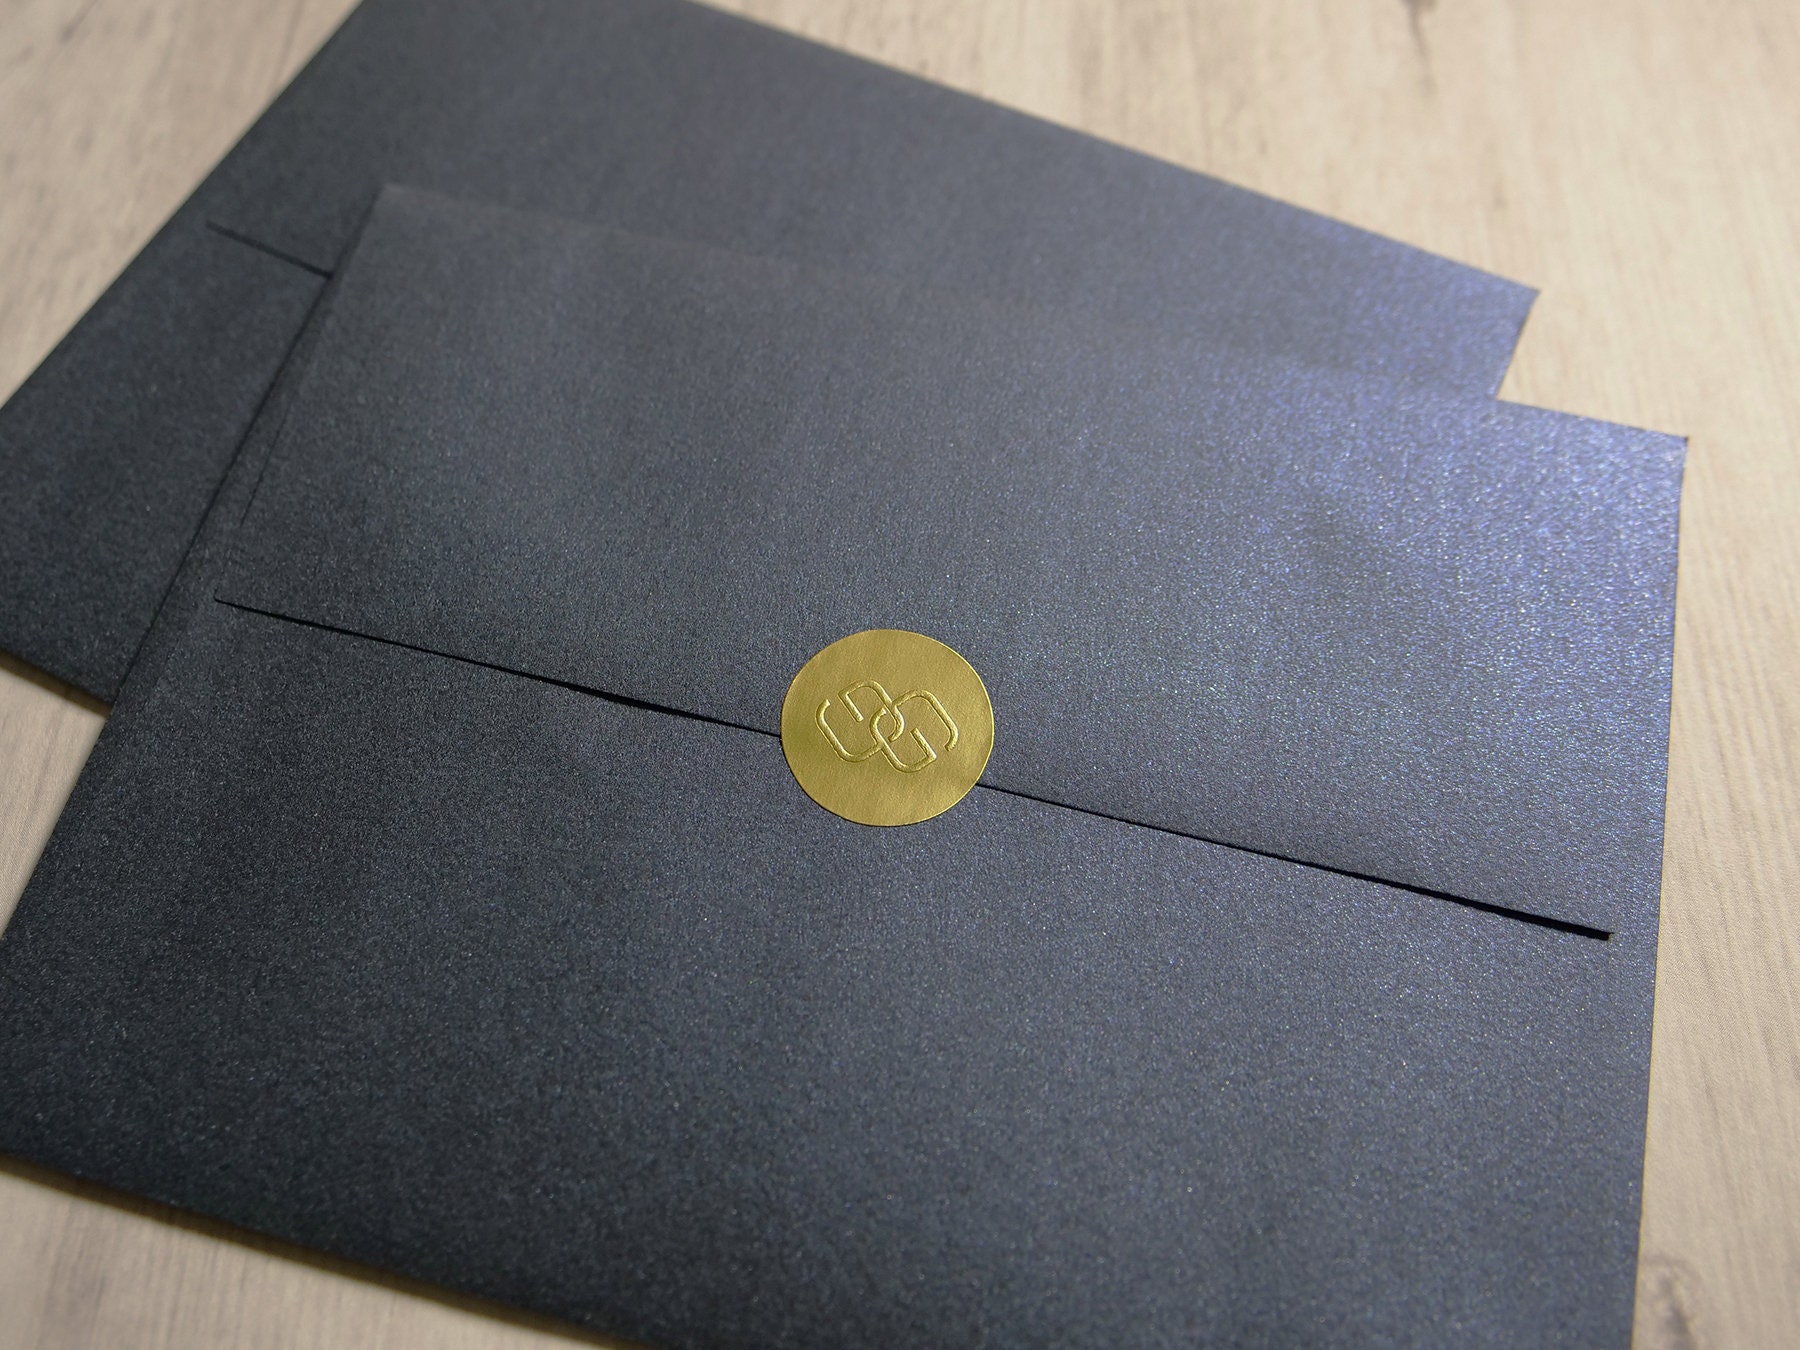 Custom Made Embossed Stickers/labels, Embossing Seal Stickers -  Sweden